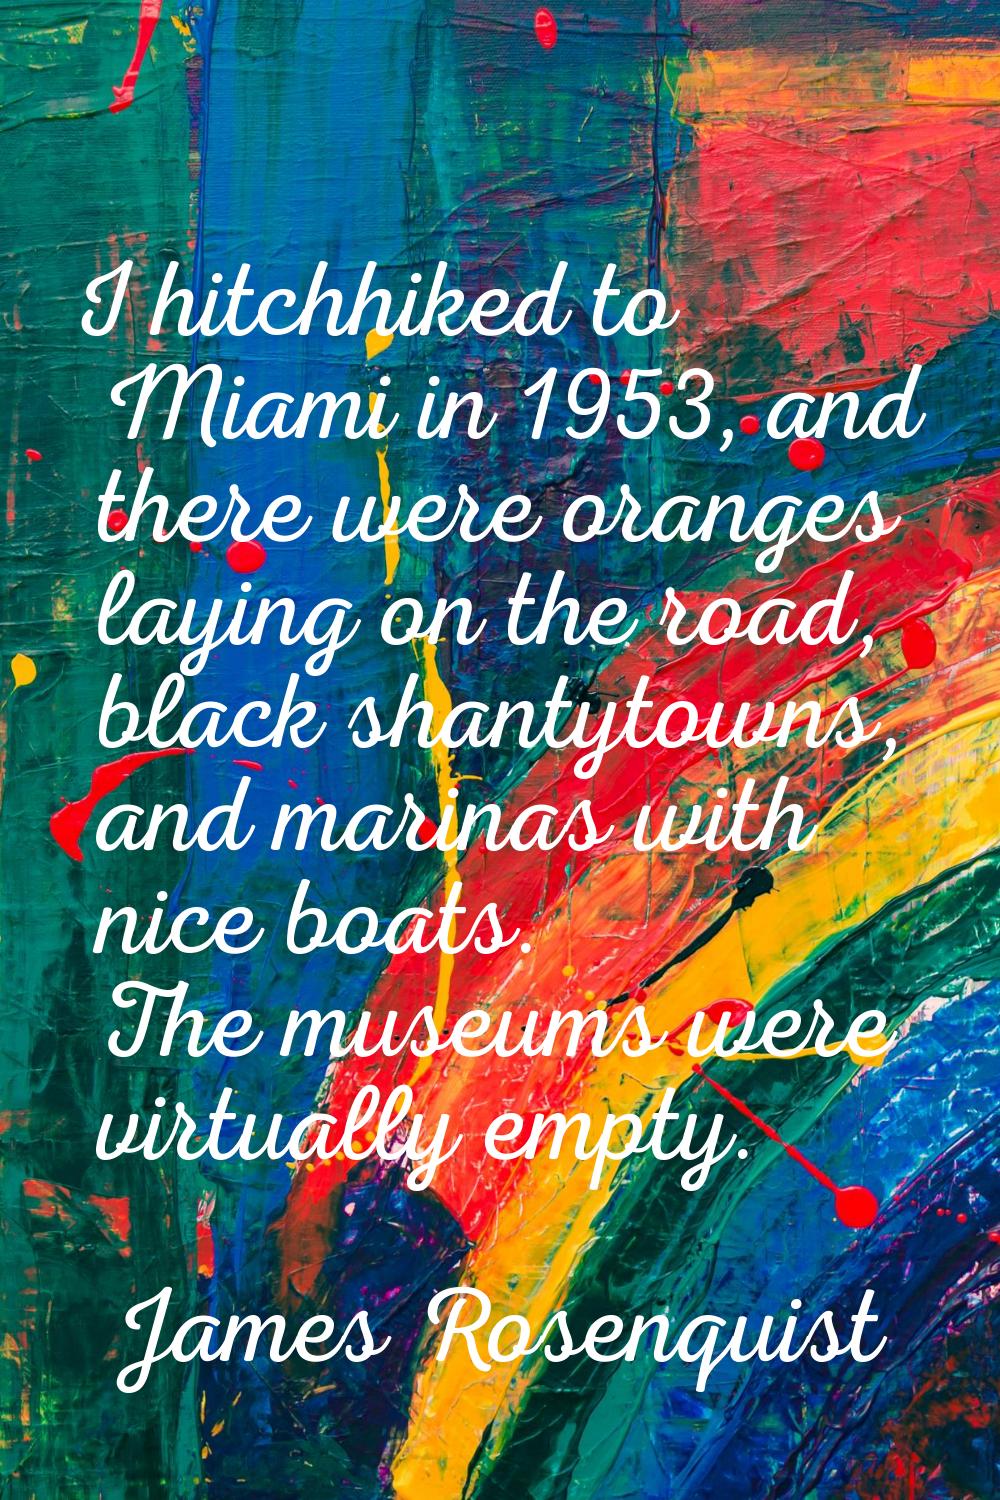 I hitchhiked to Miami in 1953, and there were oranges laying on the road, black shantytowns, and ma